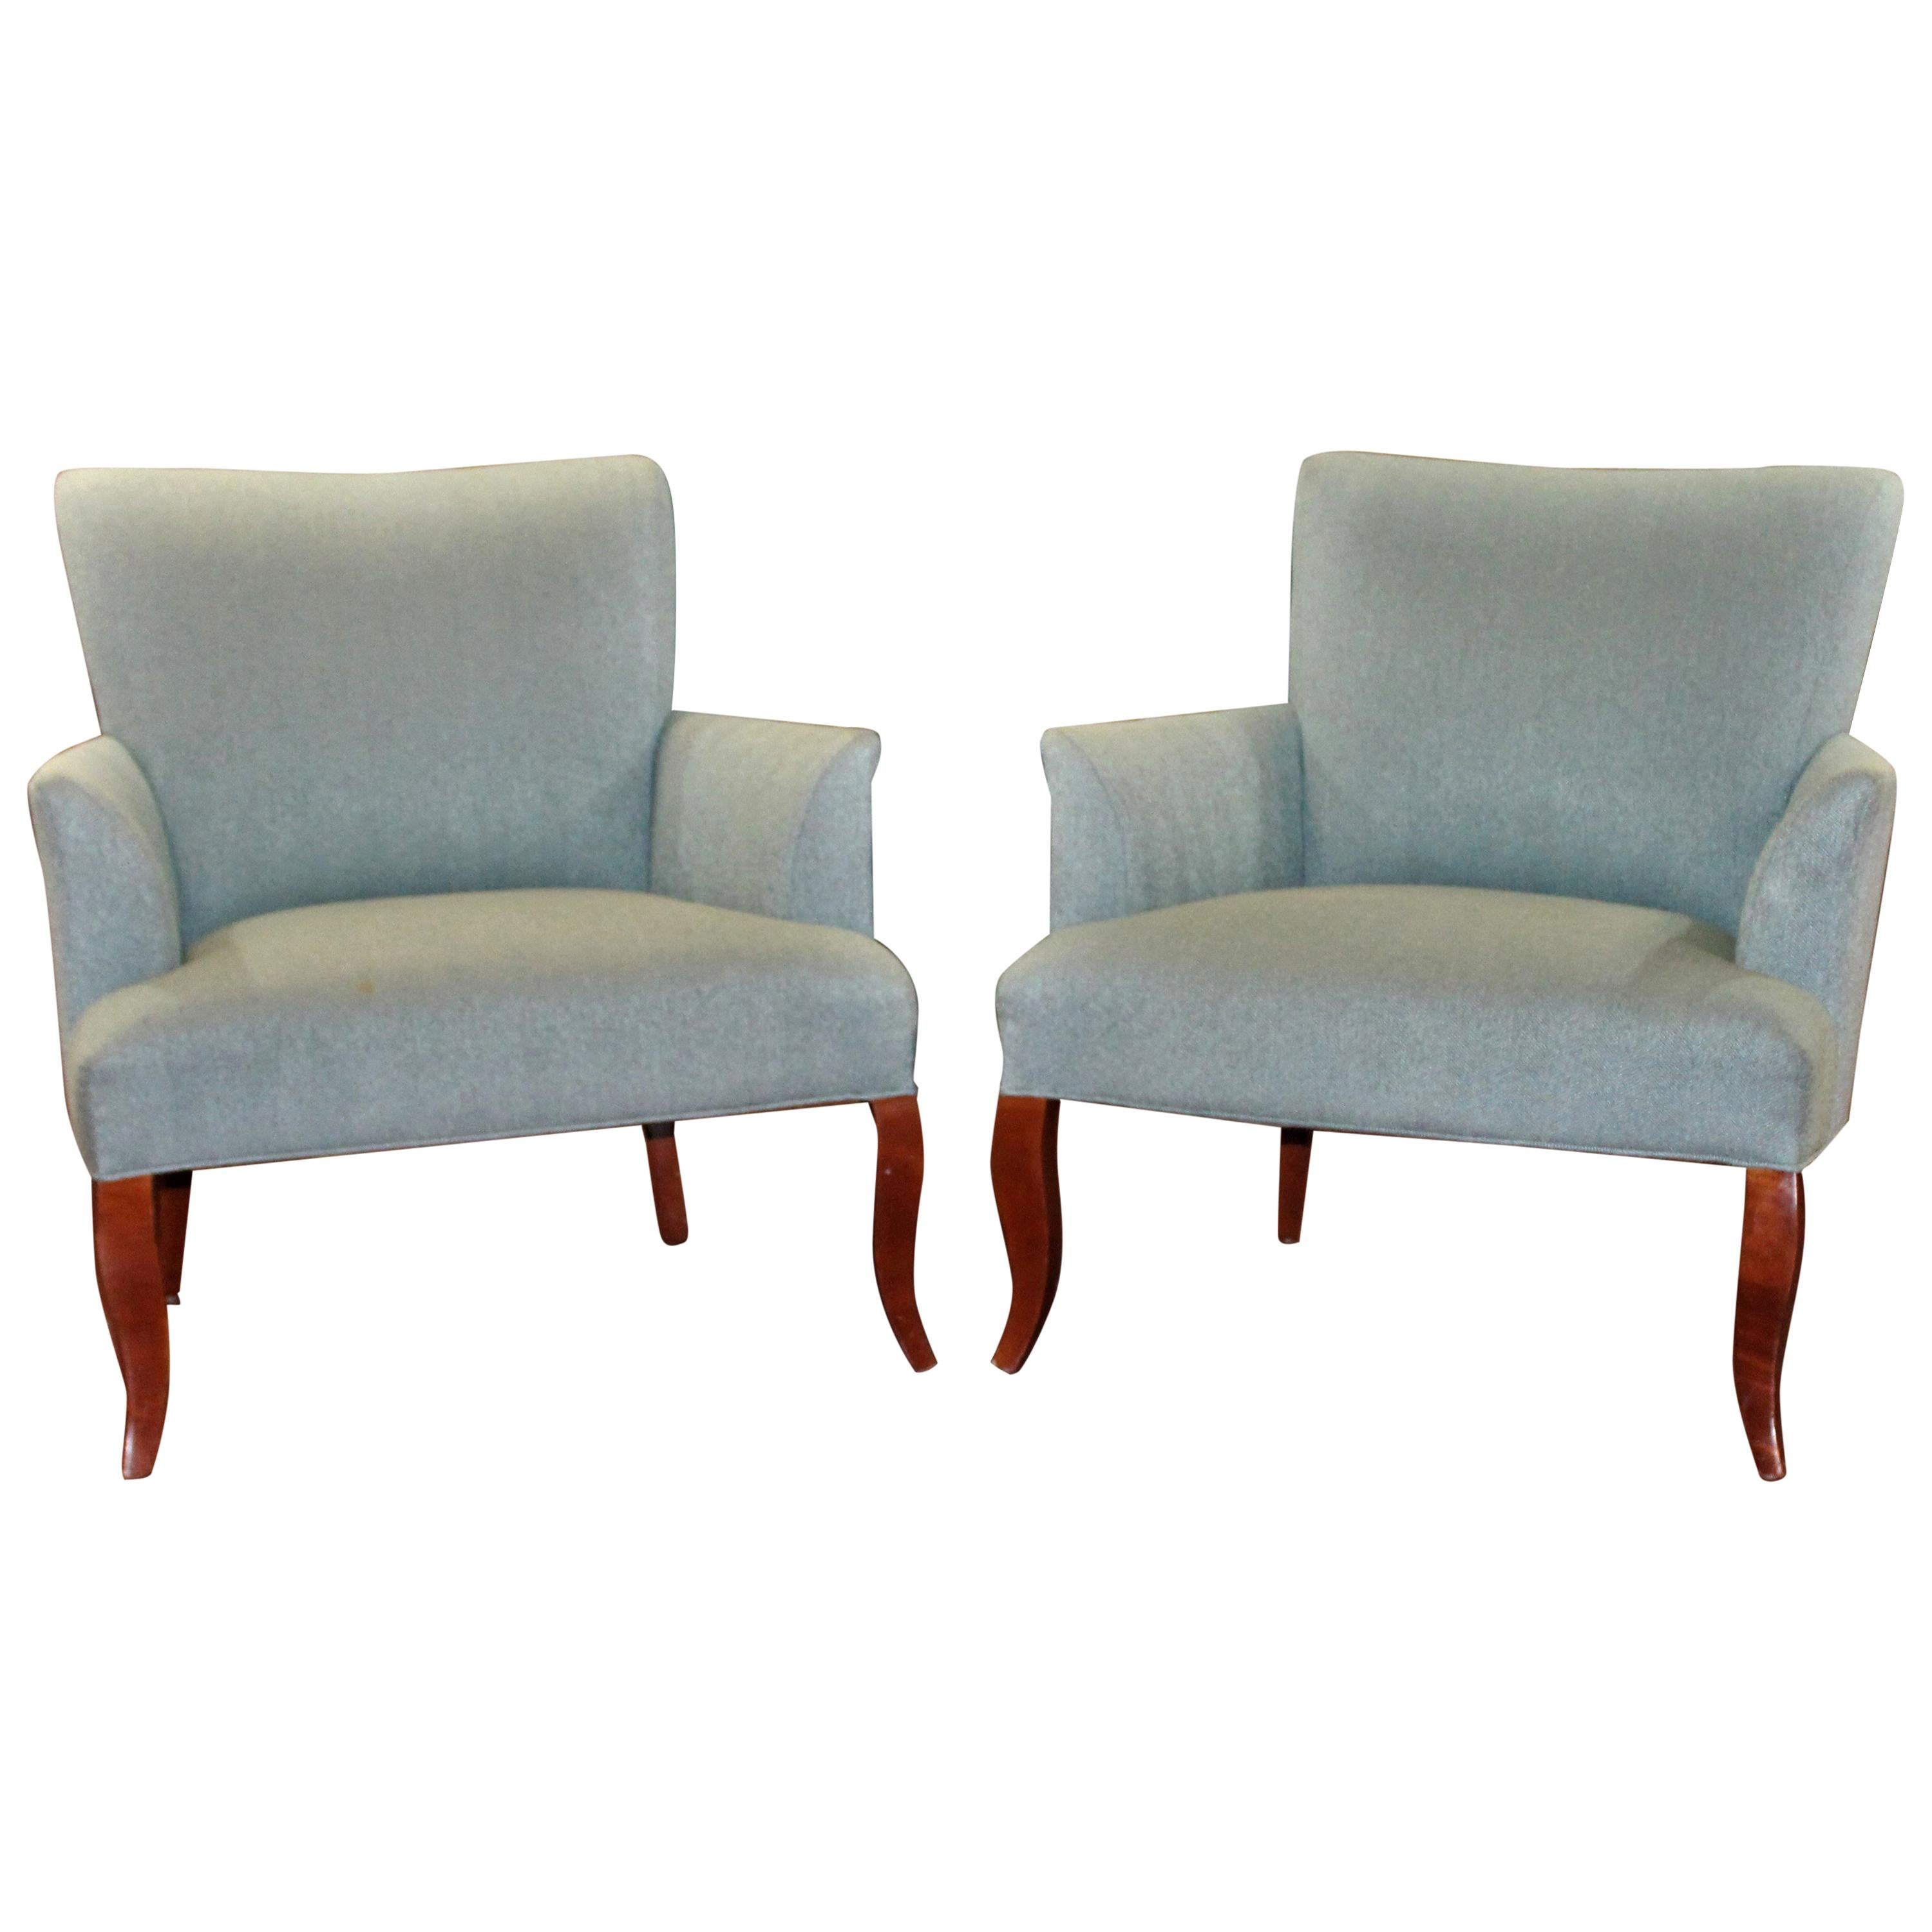 Stately Pair of Powder Blue Armchairs For Sale